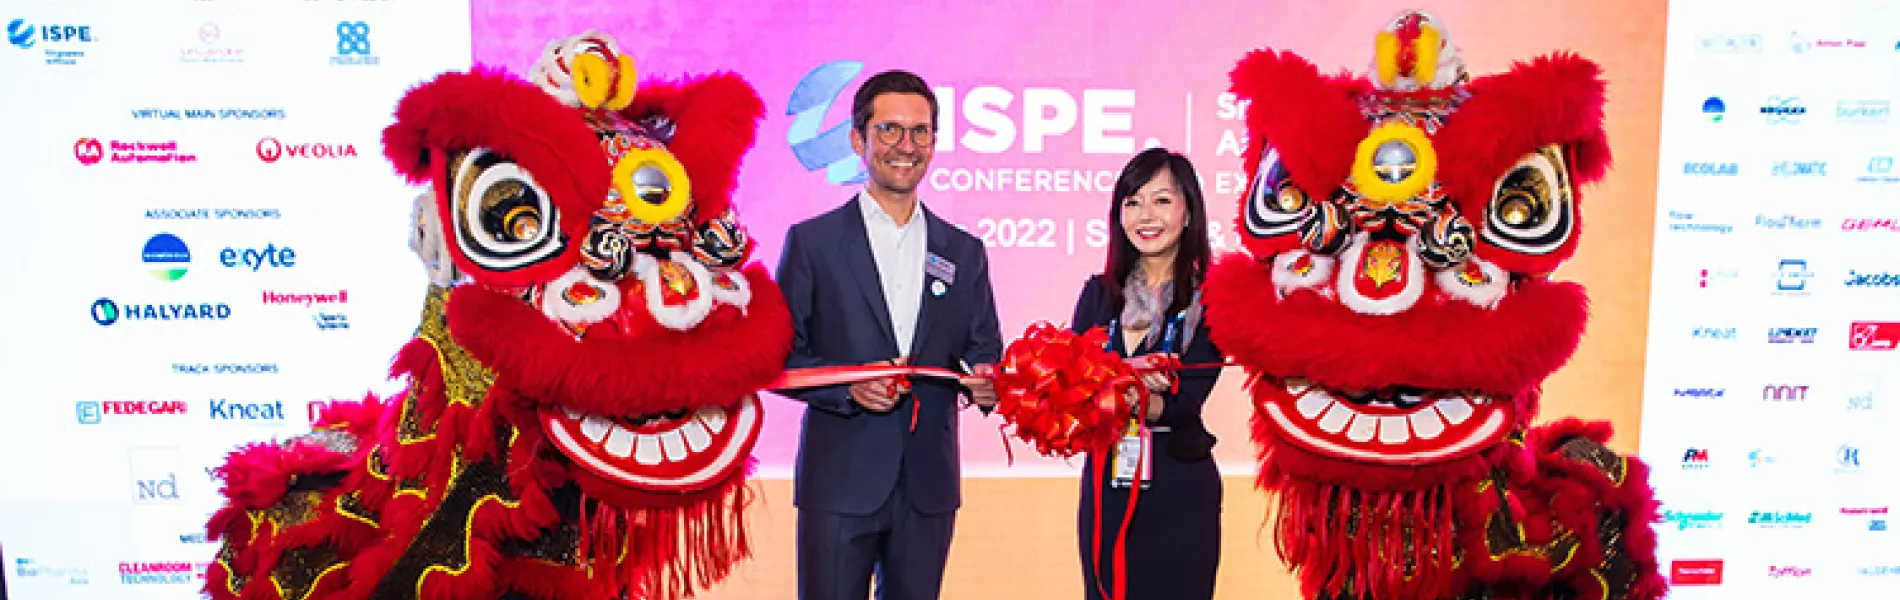 ISPE Singapore Affiliate Conference and Exhibition – 2022 Highlights